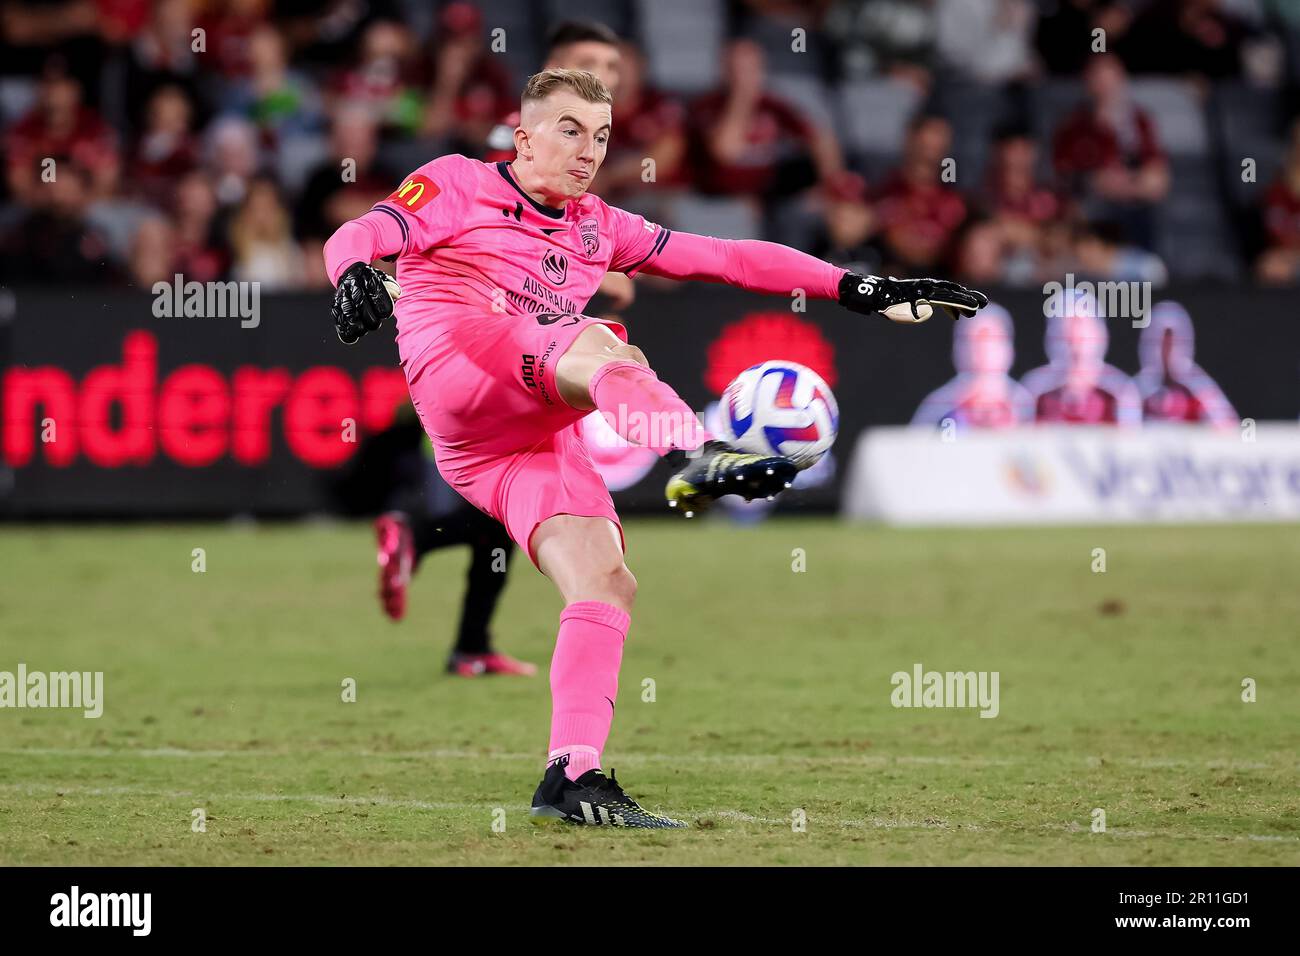 Sydney, Australia, 31 March, 2023. Joe Gauci of Adelaide United clears the ball during the A-League Men's football match between Western Sydney Wanderers FC and Adelaide United at CommBank Stadium on March 31, 2023 in Sydney, Australia. Credit: Damian Briggs/Speed Media/Alamy Live News Stock Photo